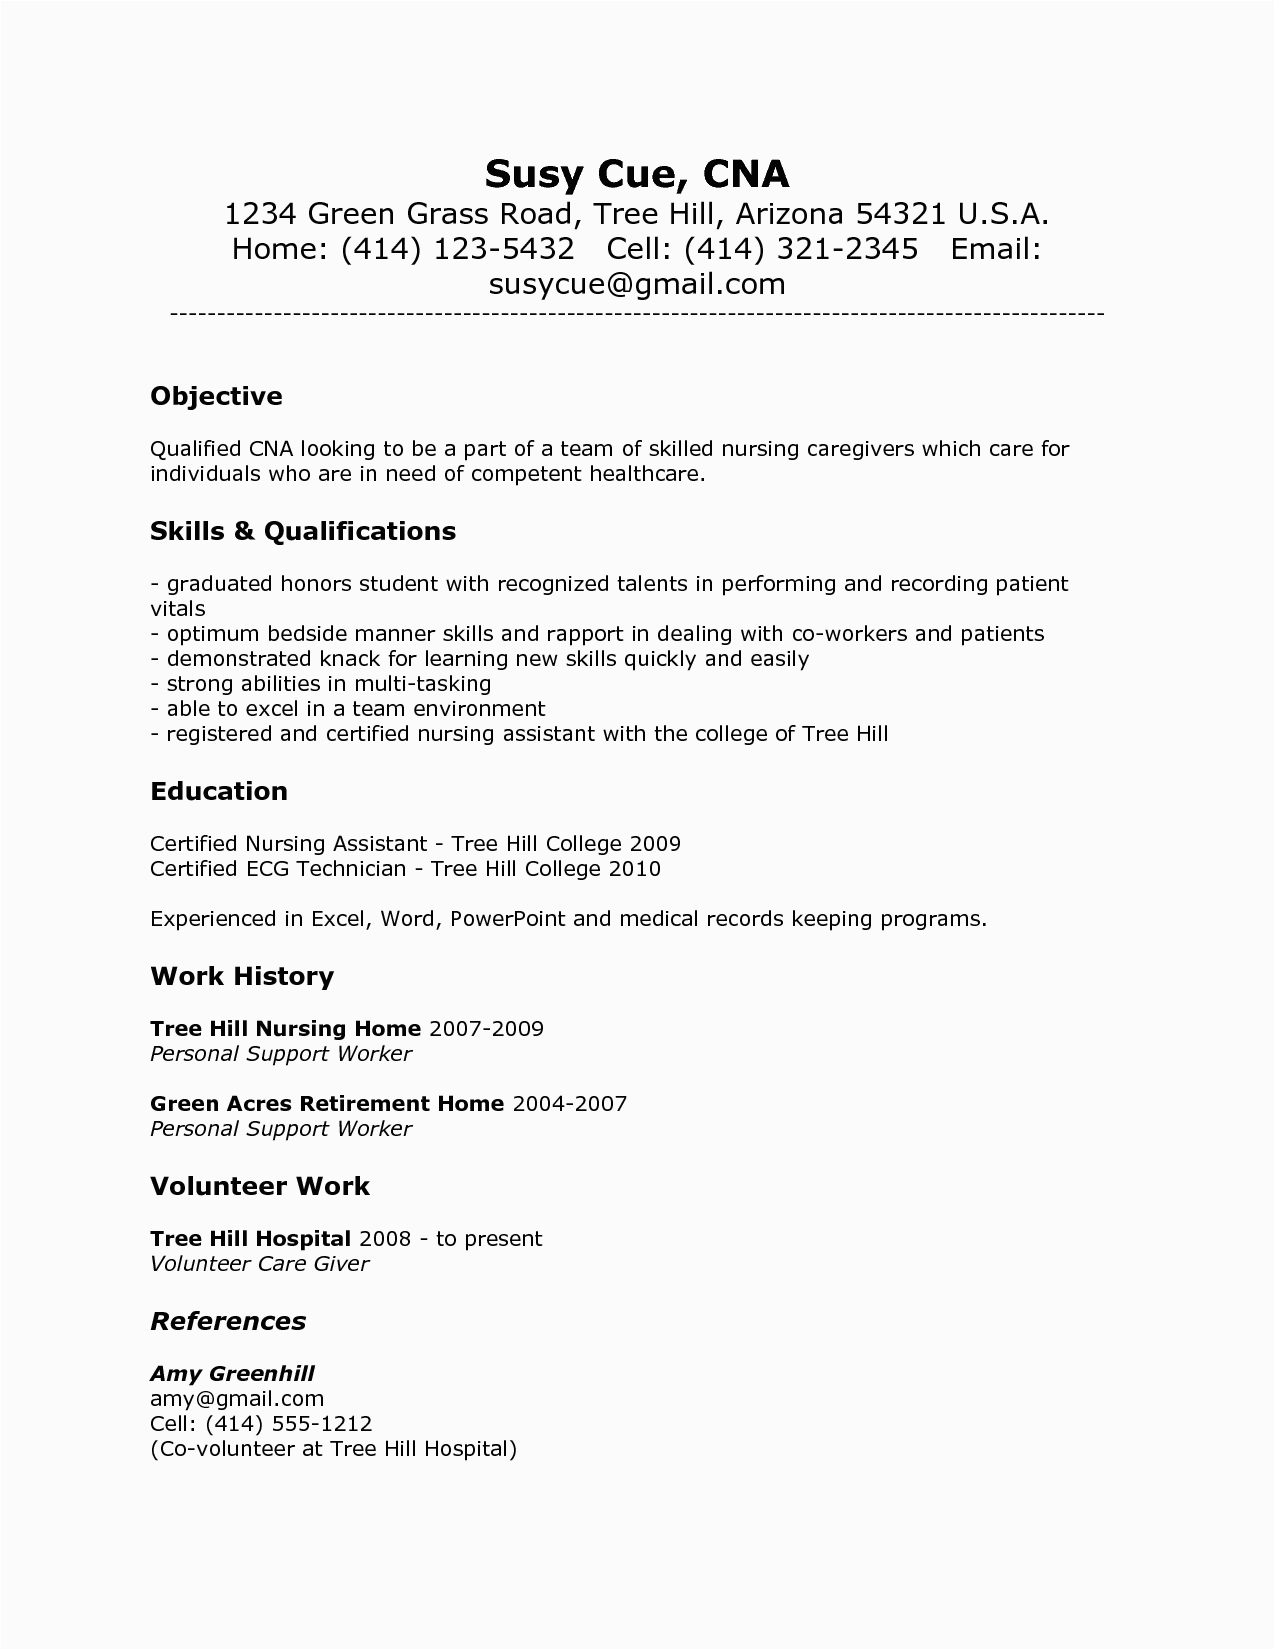 Cna Resume Sample with No Work Experience Cna Resume Sample